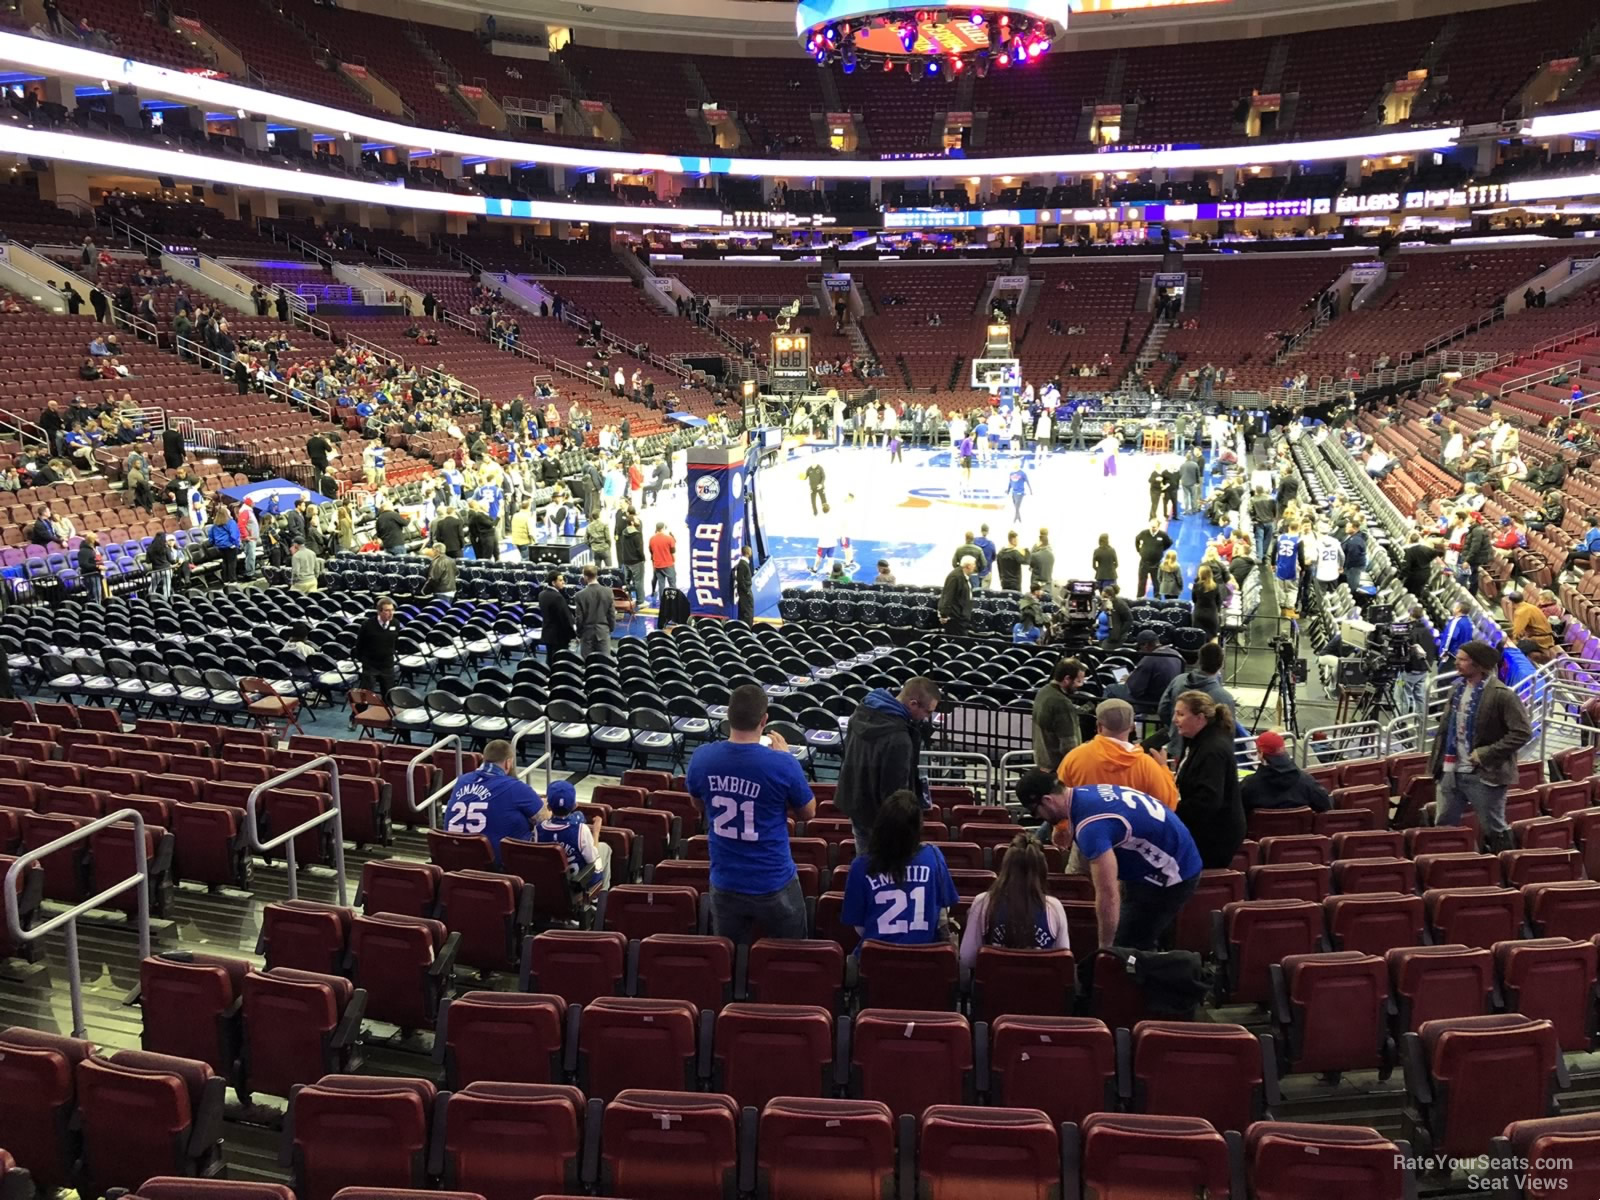 section 108, row 14 seat view  for basketball - wells fargo center